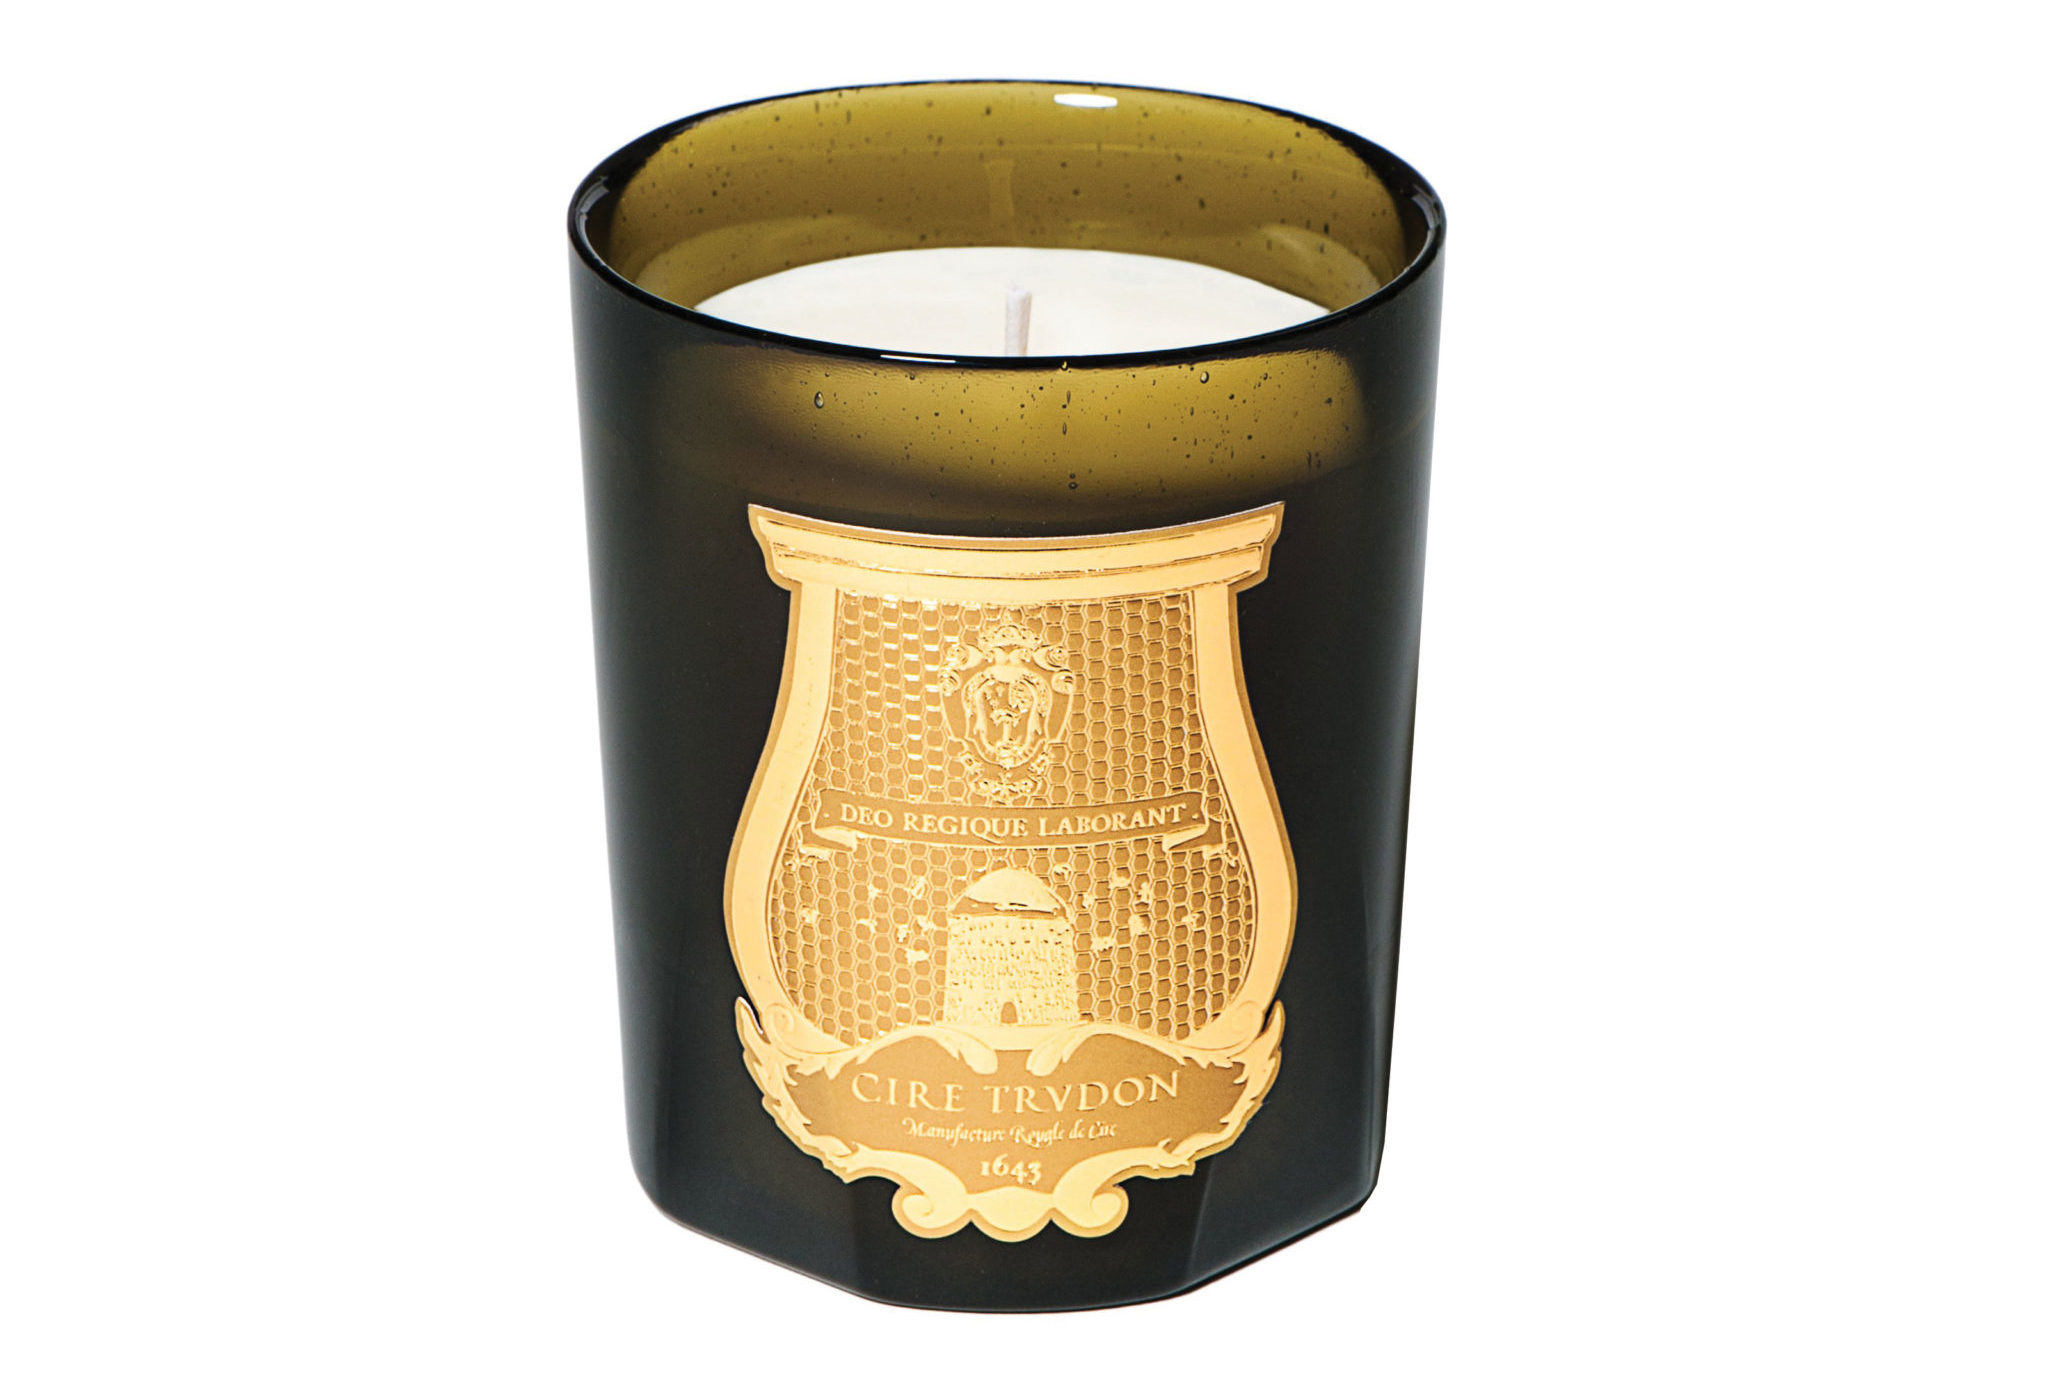 Alessandra Steinherr's most loved scented candles